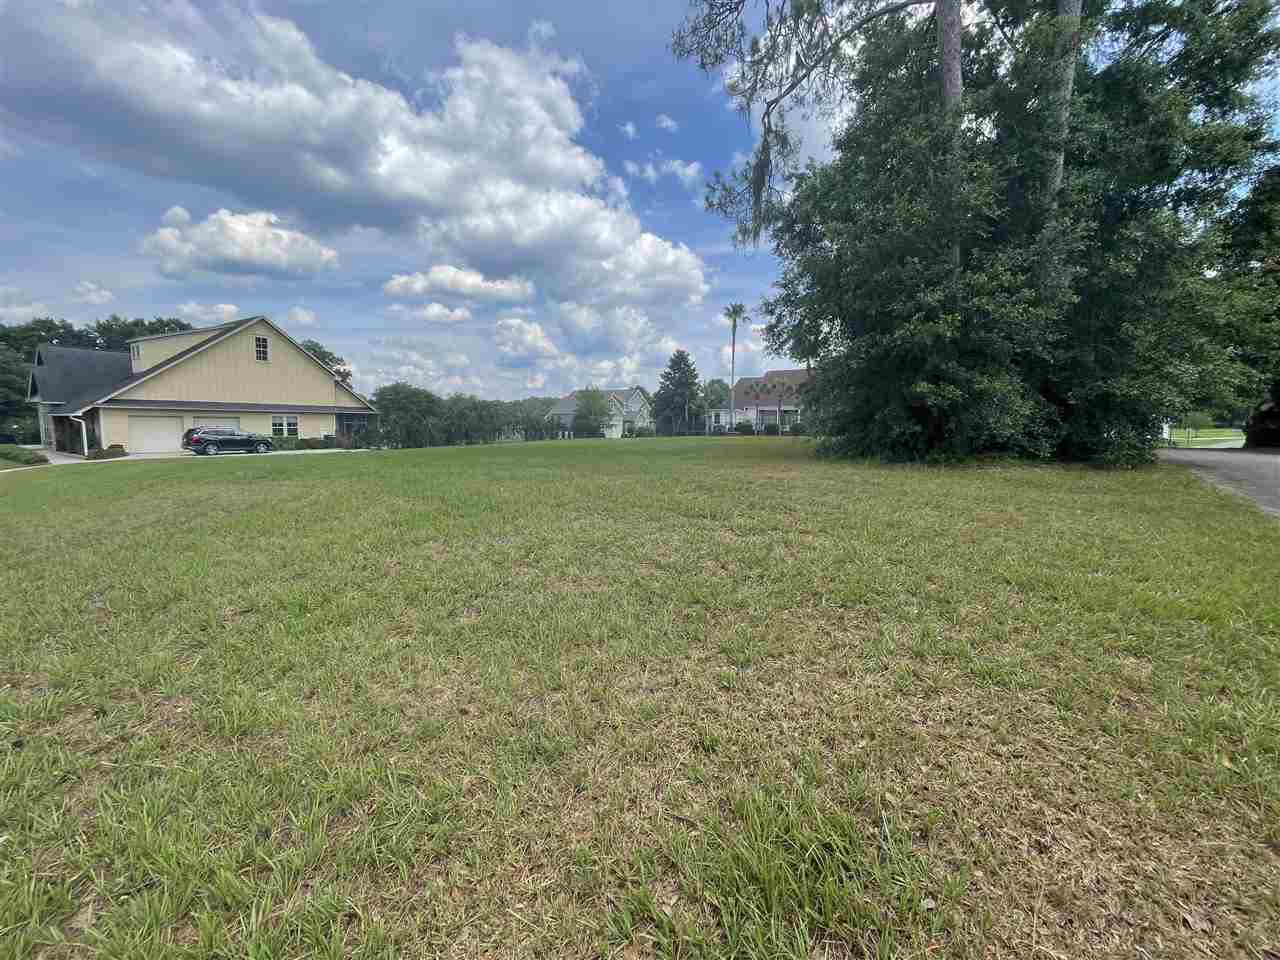 Half acre lot in beautiful SouthWood! Look no further for the perfect place to build your dream home. Quick access to Biltmore Ave and in the proximity to the community center. Enjoy all the amenities of SouthWood including miles of nature trails, community garden, tennis courts, community pool, scenic views. Don't miss this great opportunity!